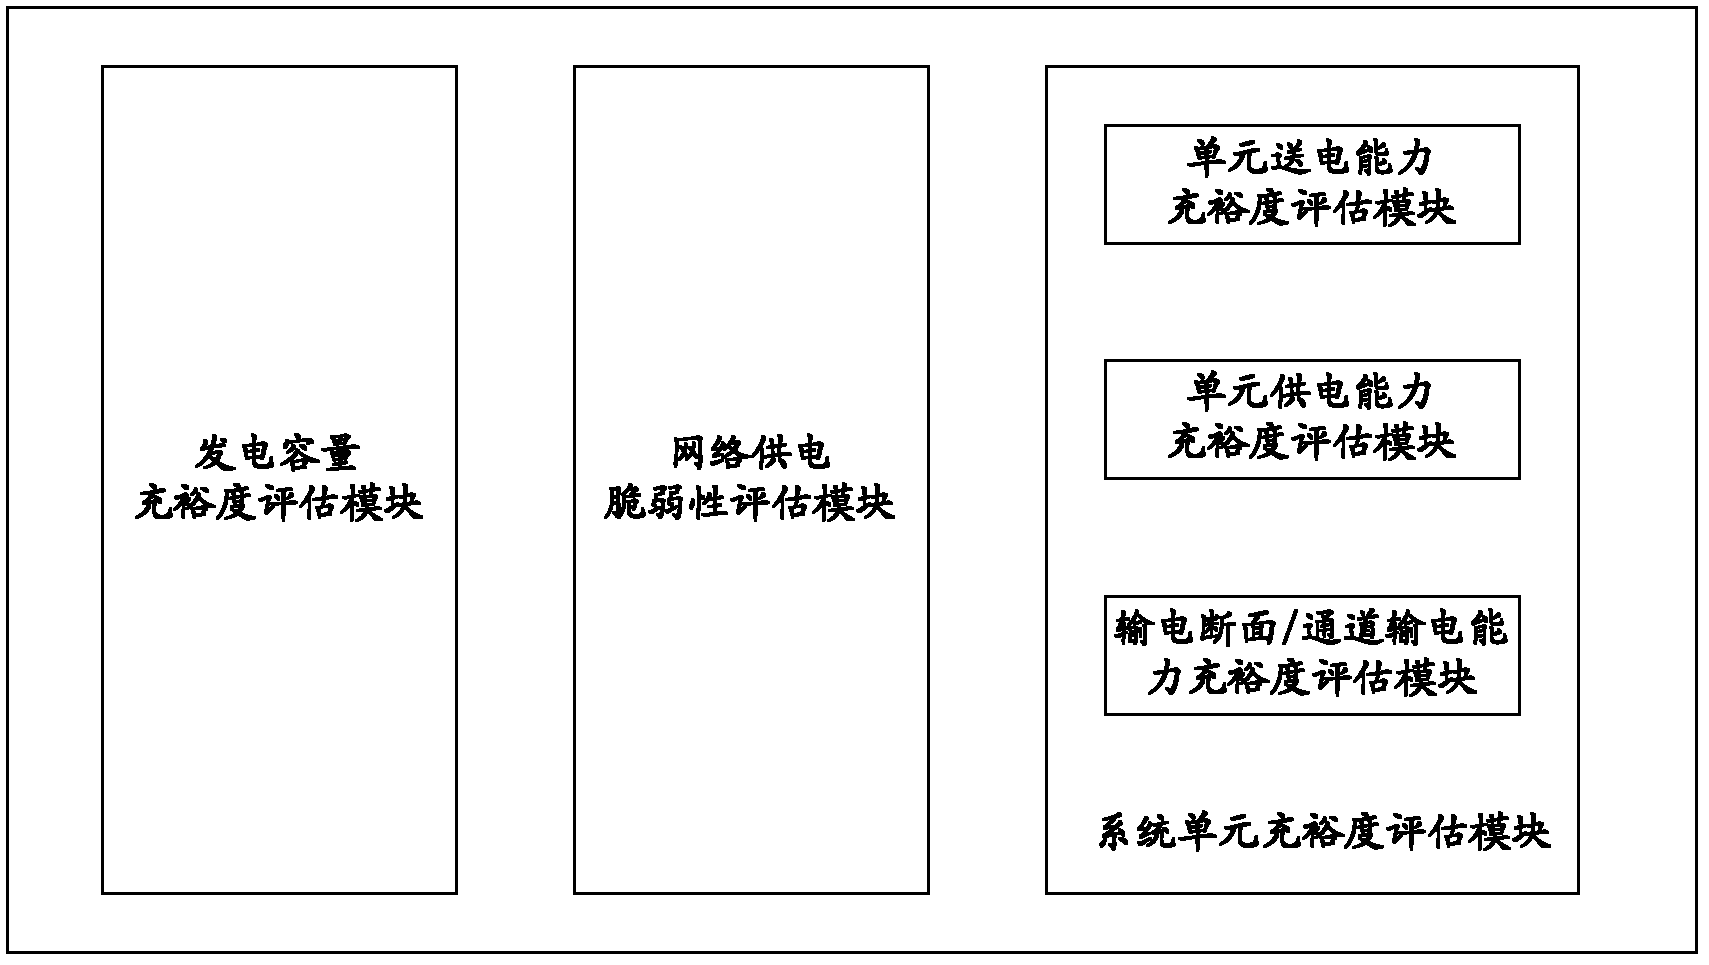 System for evaluating adequacy of power supply system